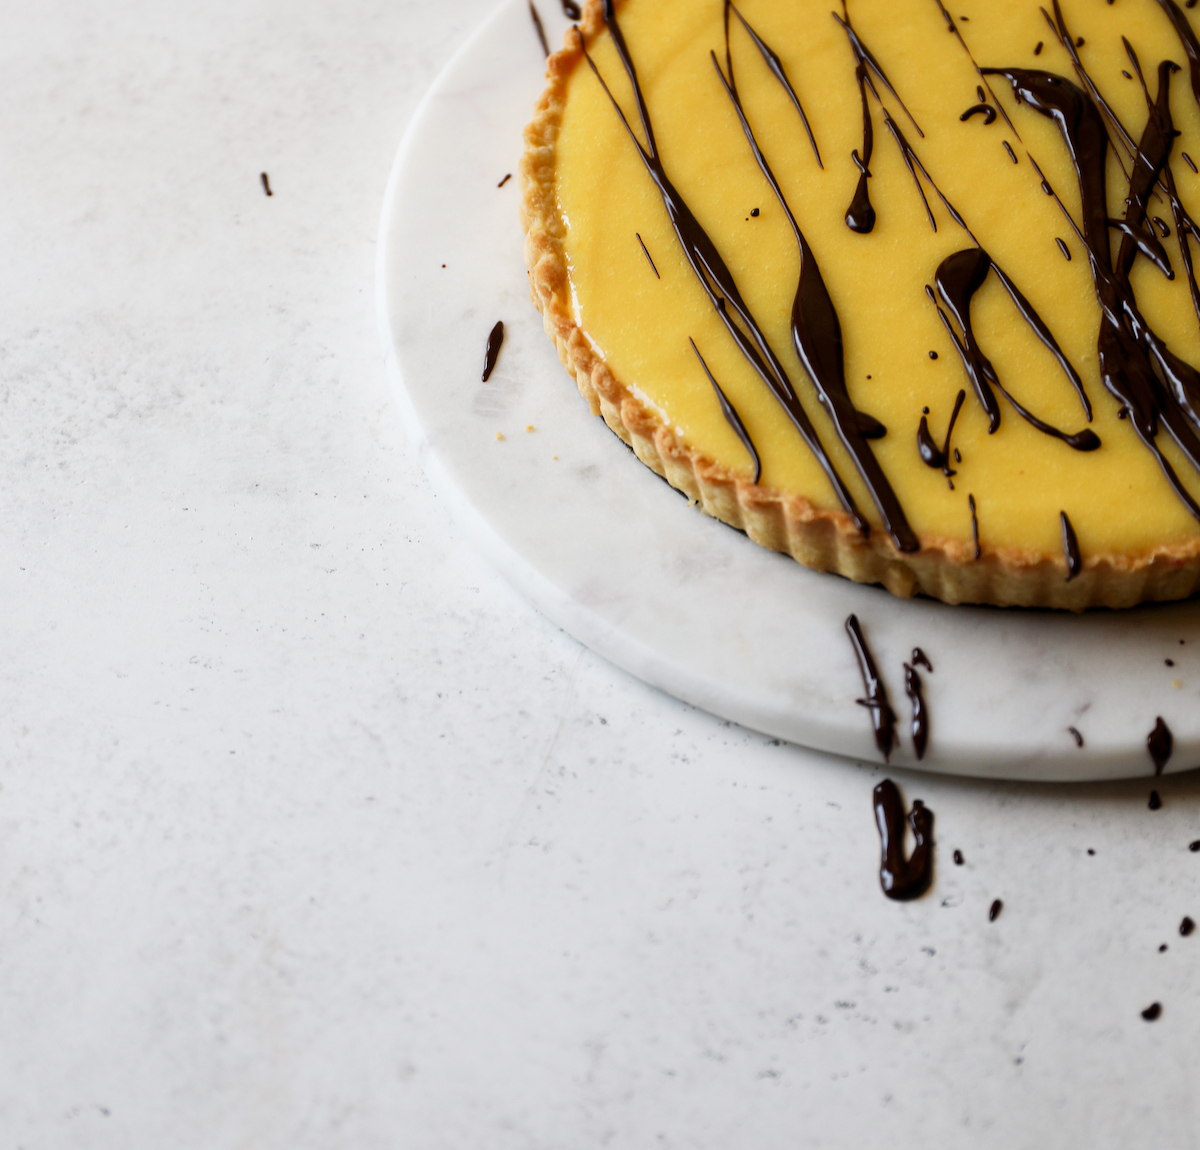 Chocolate Lemon Tart from Bake From Scratch (Vol 3) Cookbook by Brian Hart Hoffman via DisplacedHousewife, Rebecca Firth + Cookbook Giveaway!